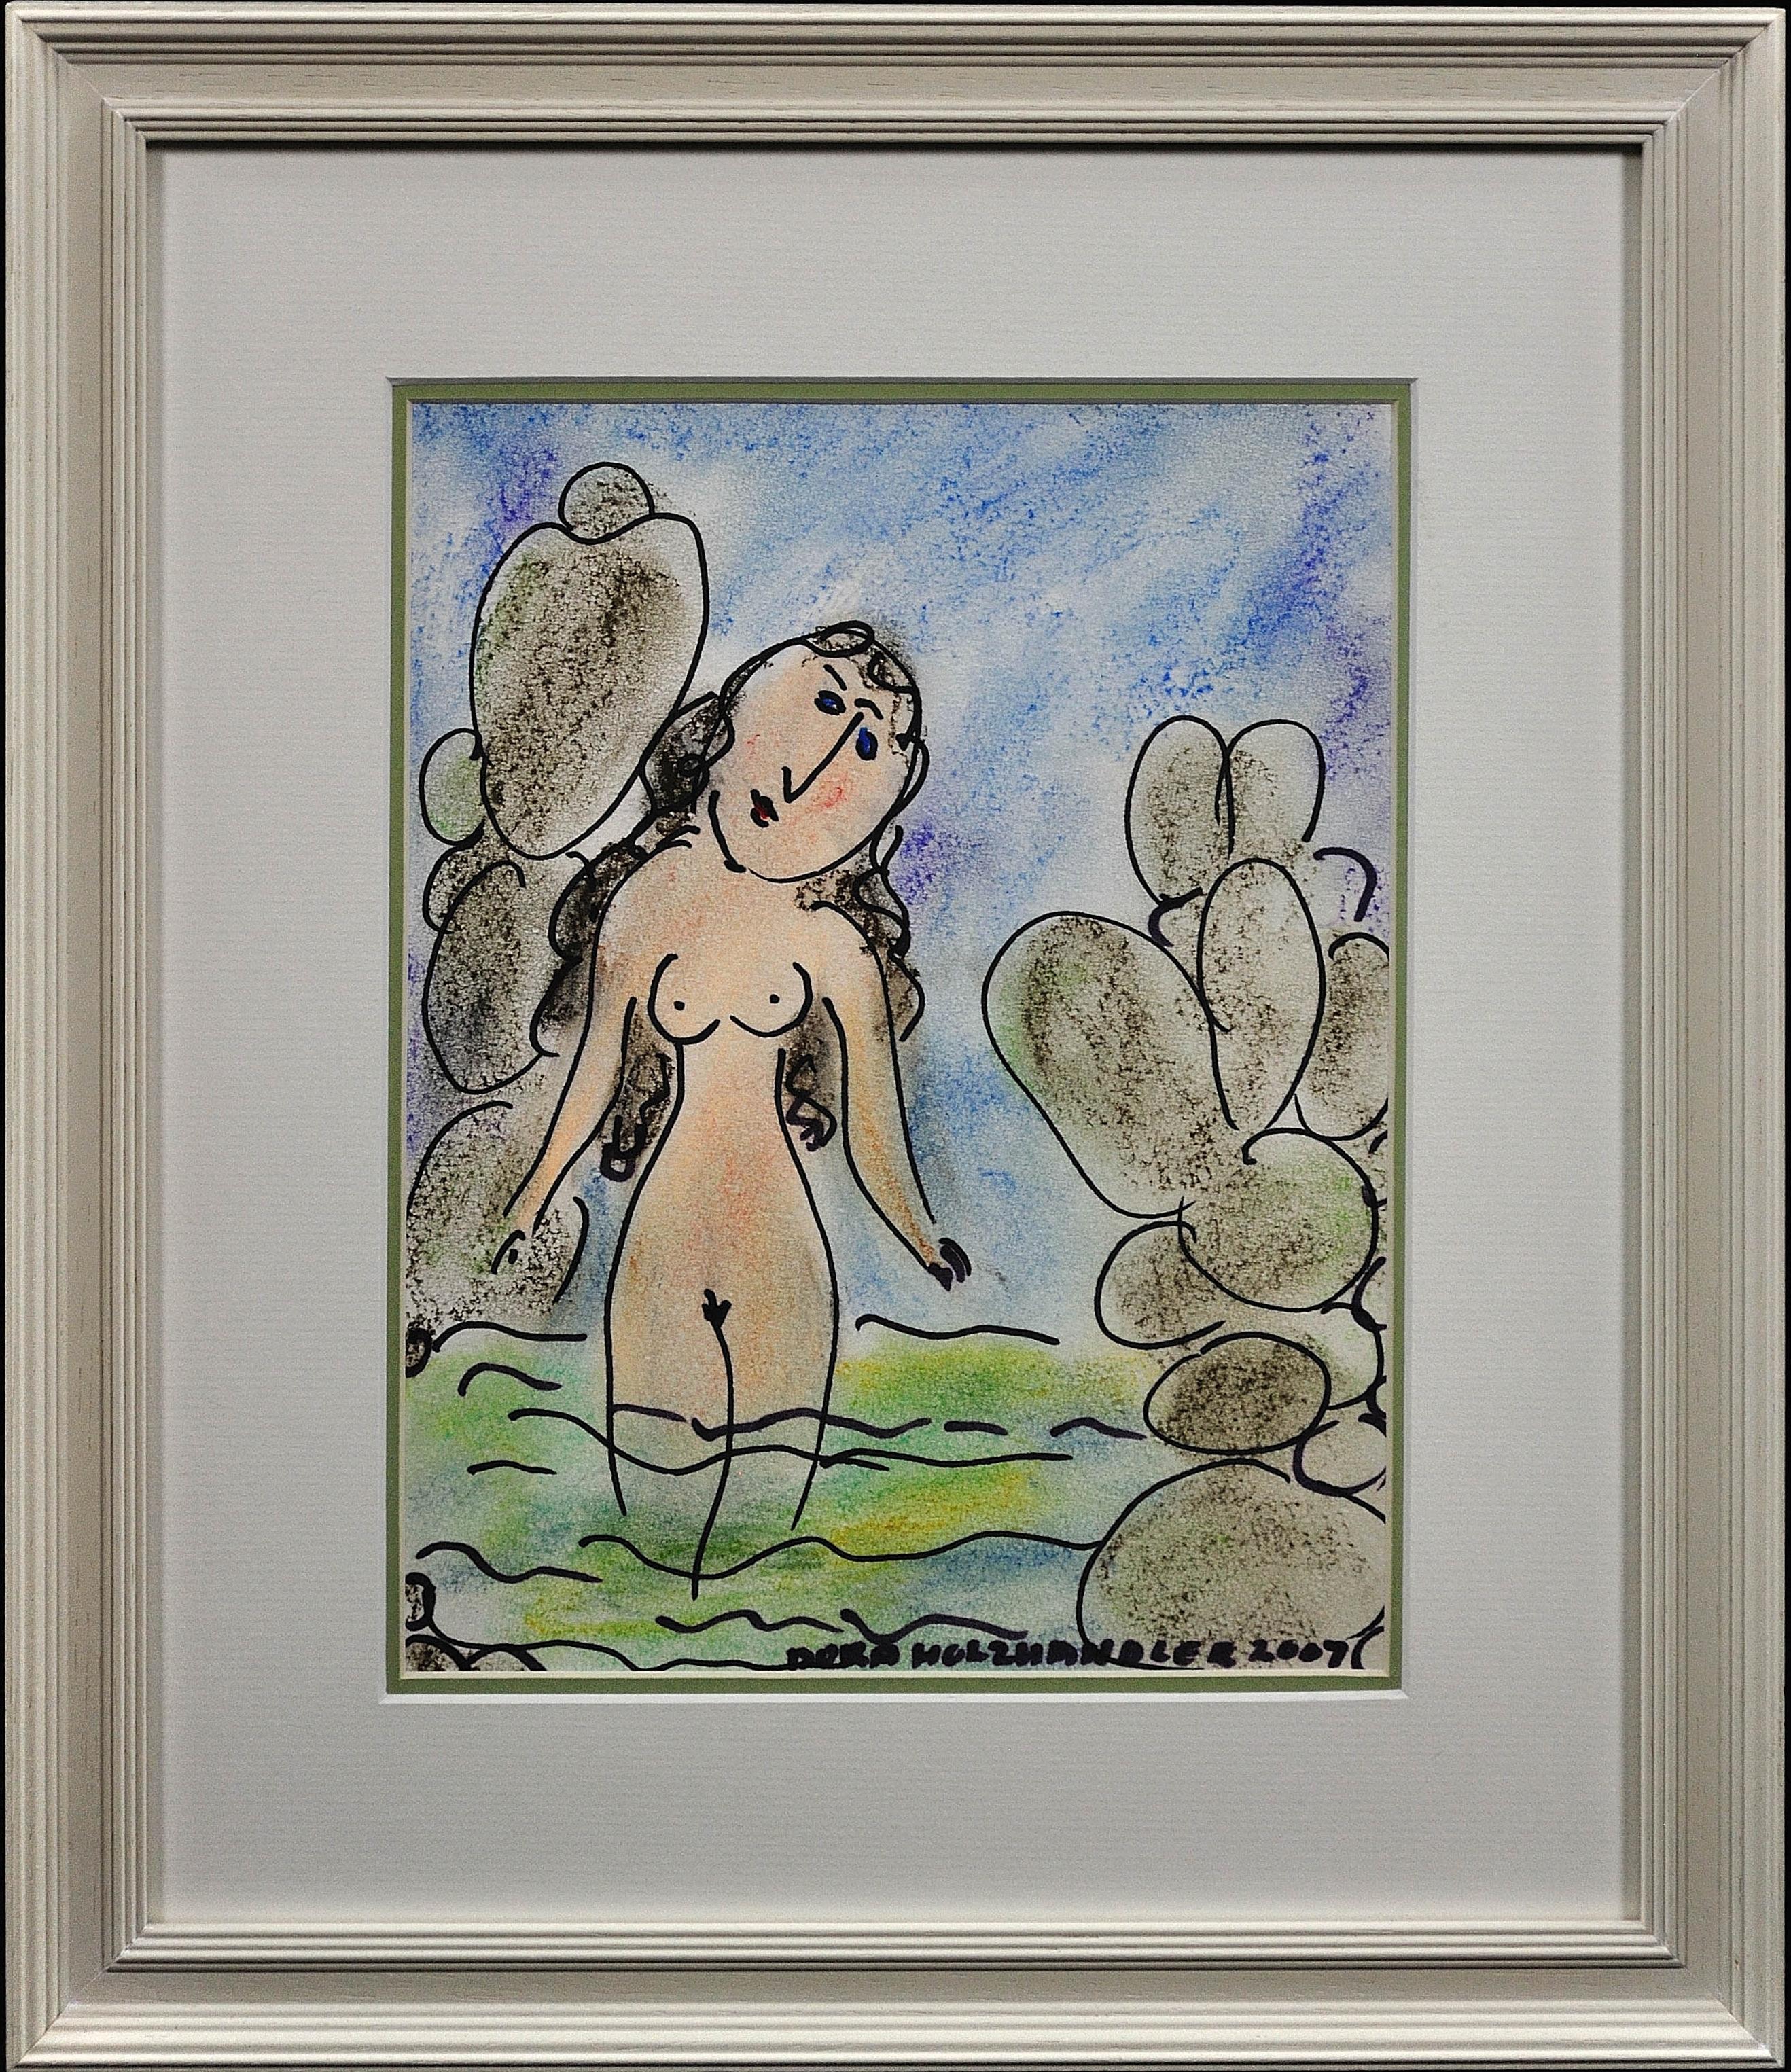 Dora Holzhandler. 
Lady in the Sea.
French - British ( b.1928 - d.2015 ).
Pastel and Felt Pen on Paper.
Signed & dated 2007 lower right.
Image size 10.8 inches x 8.3 inches ( 27.5cm x 21cm ).
Frame size 17.7 inches x 15.2 inches ( 45cm x 38.5cm